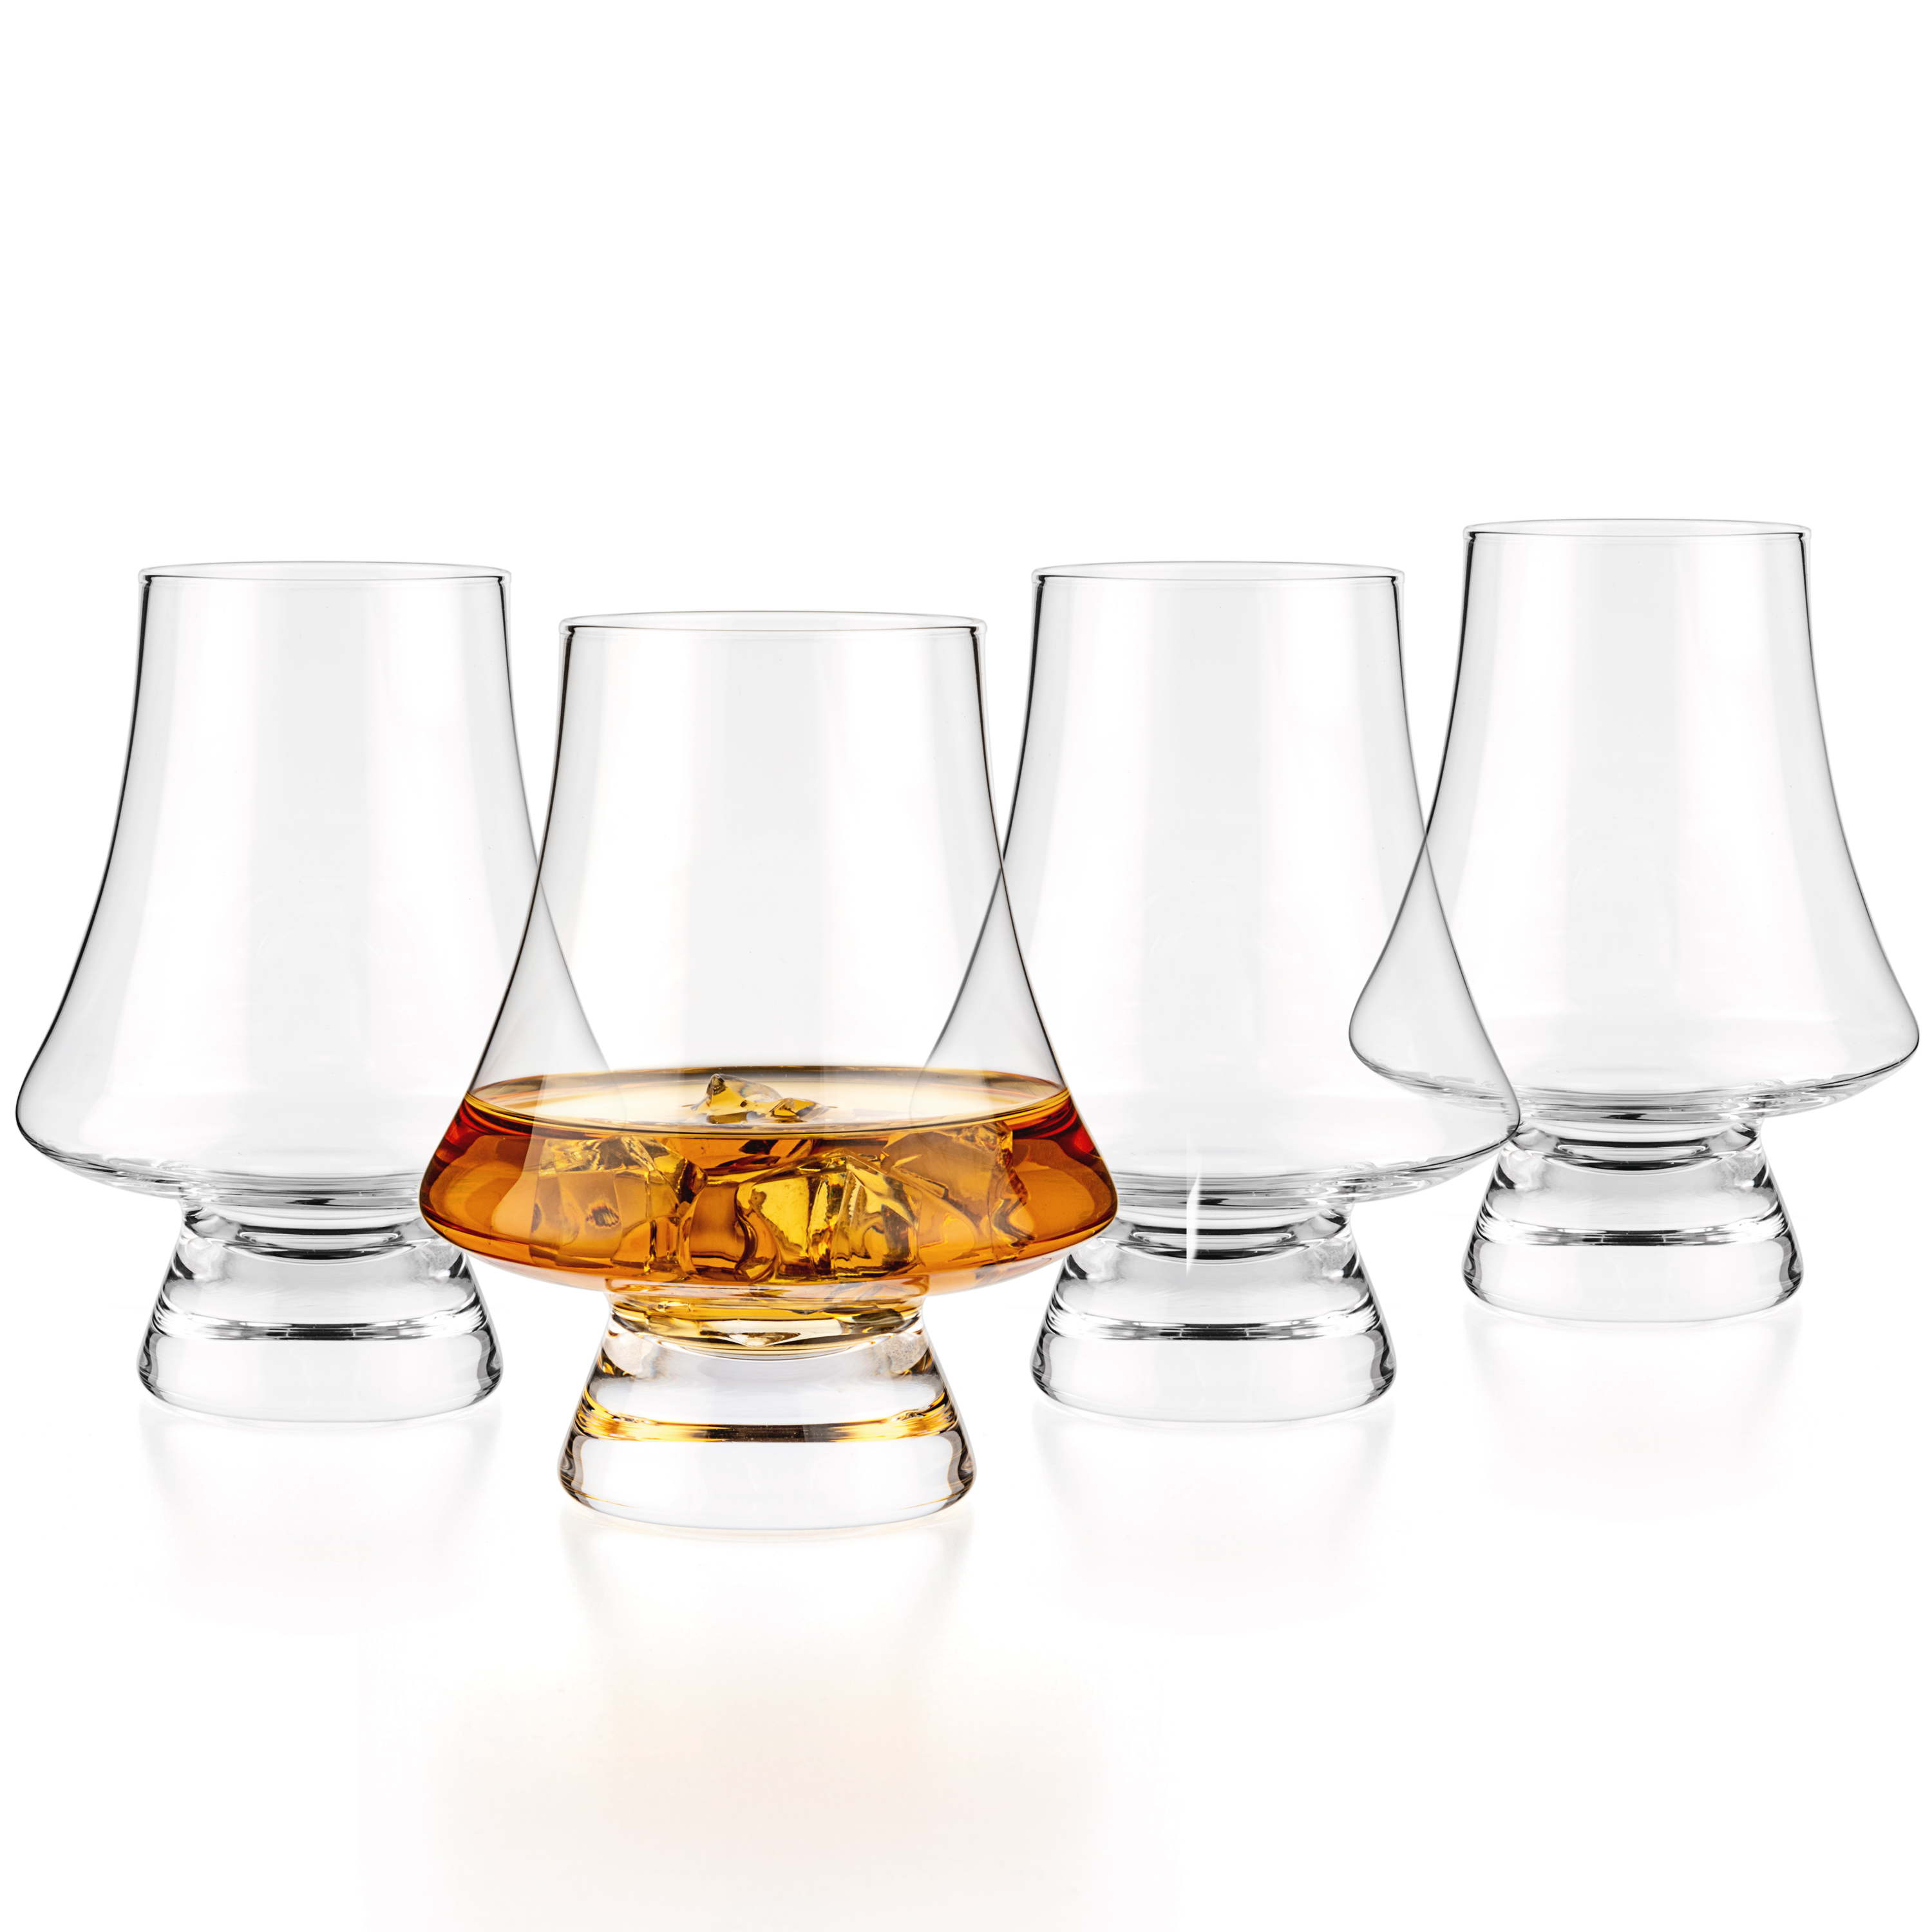 Bourbon Whisky Crystal Glass Snifter Set of 2 9-ounce/260ml Good for Cognac Brandy Scotch Handcrafted Luxbe Wide Tasting Glasses 